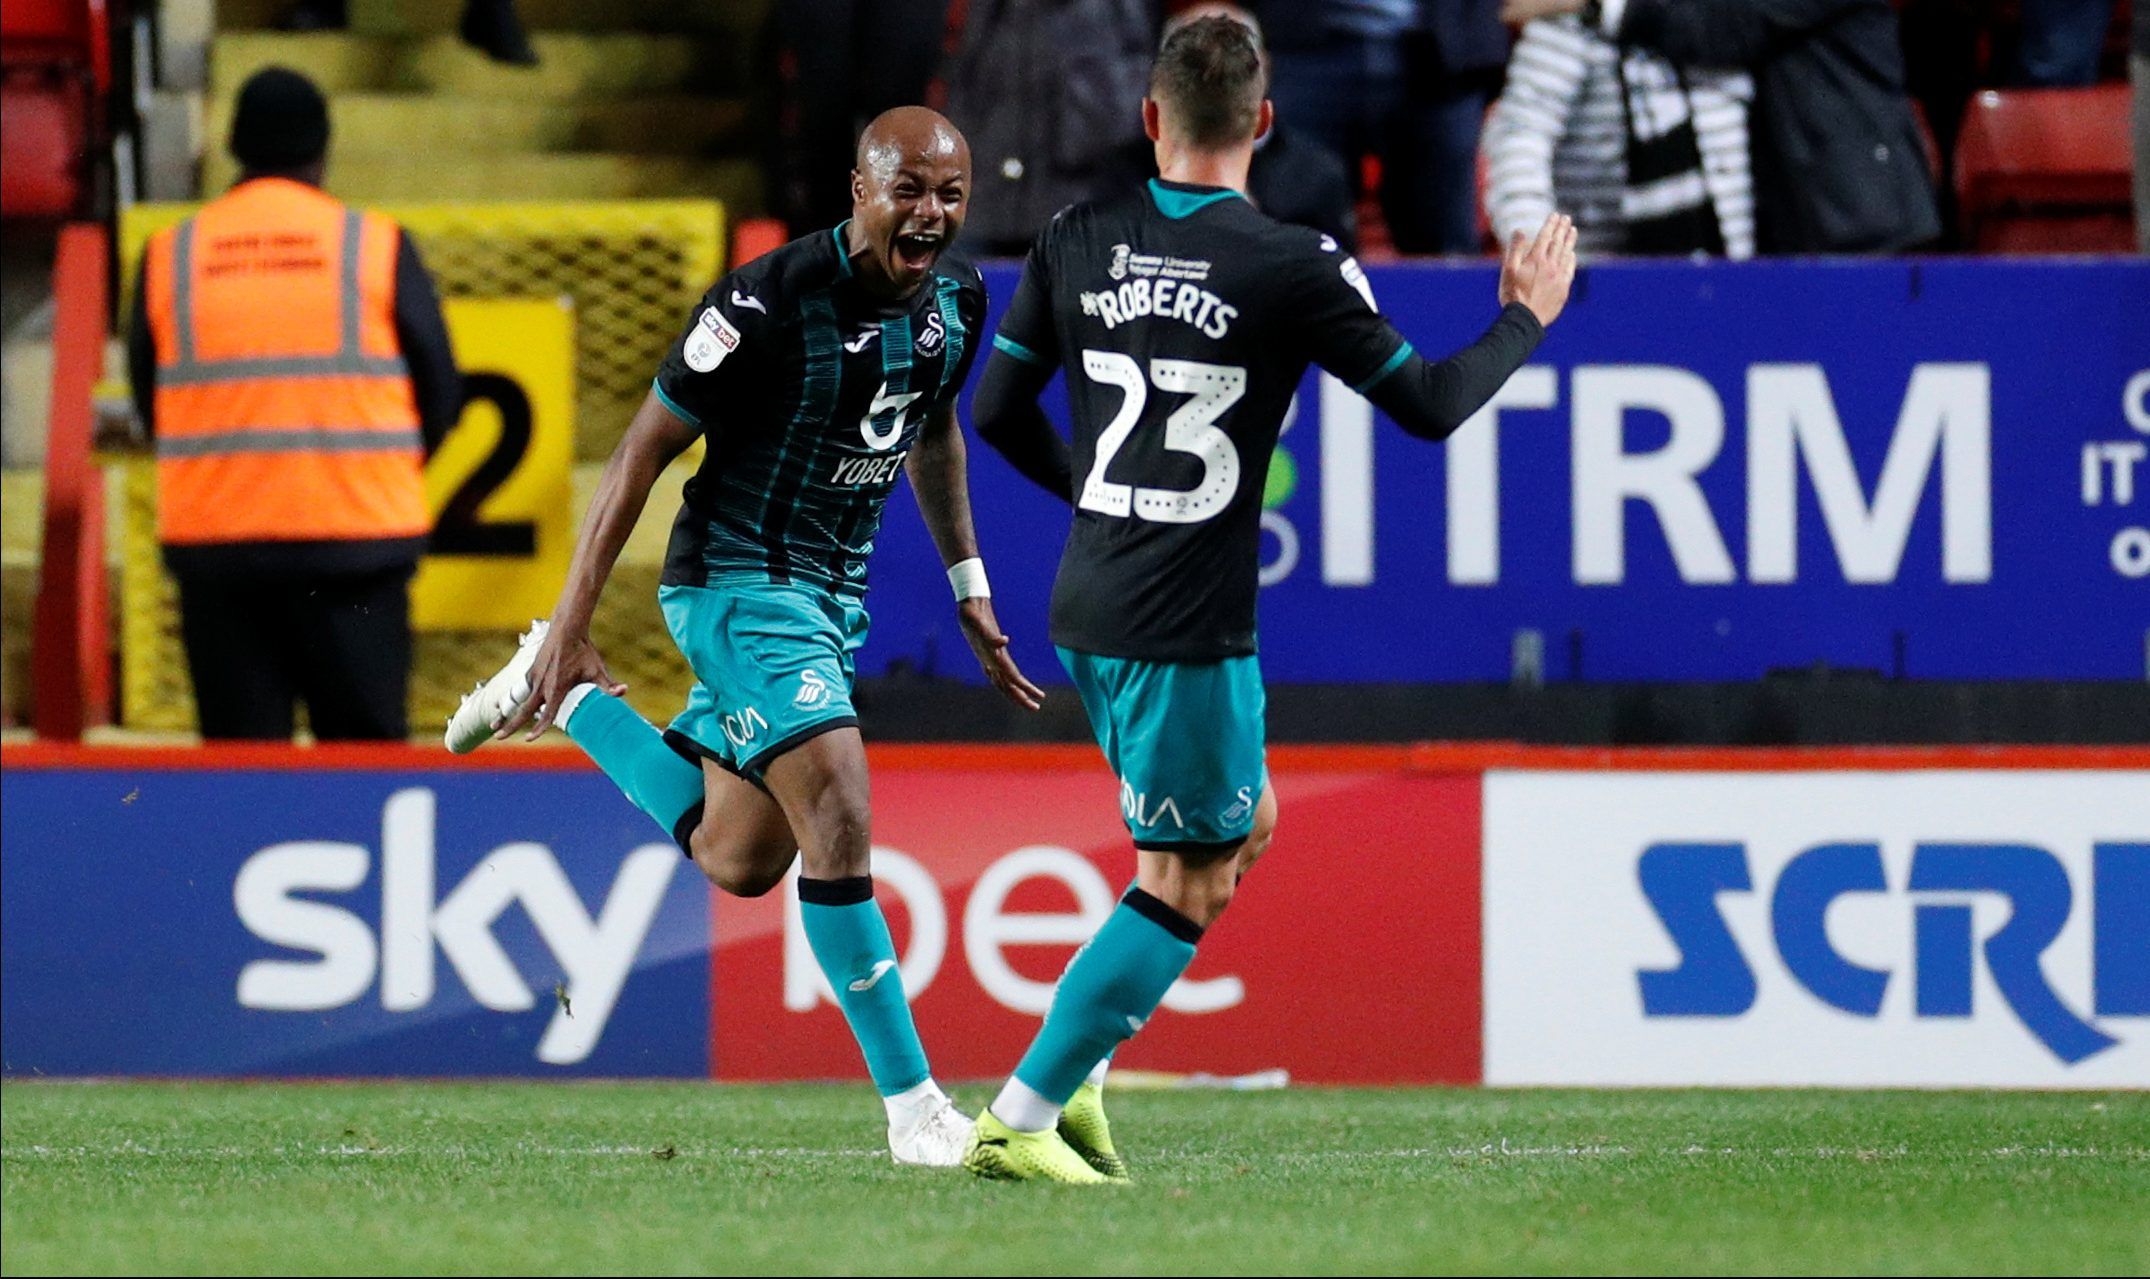 Soccer Football - Championship - Charlton Athletic v Swansea City - The Valley, London, Britain - October 2, 2019  Swansea City's Andre Ayew celebrates after scoring their second goal   Action Images/John Sibley  EDITORIAL USE ONLY. No use with unauthorized audio, video, data, fixture lists, club/league logos or 